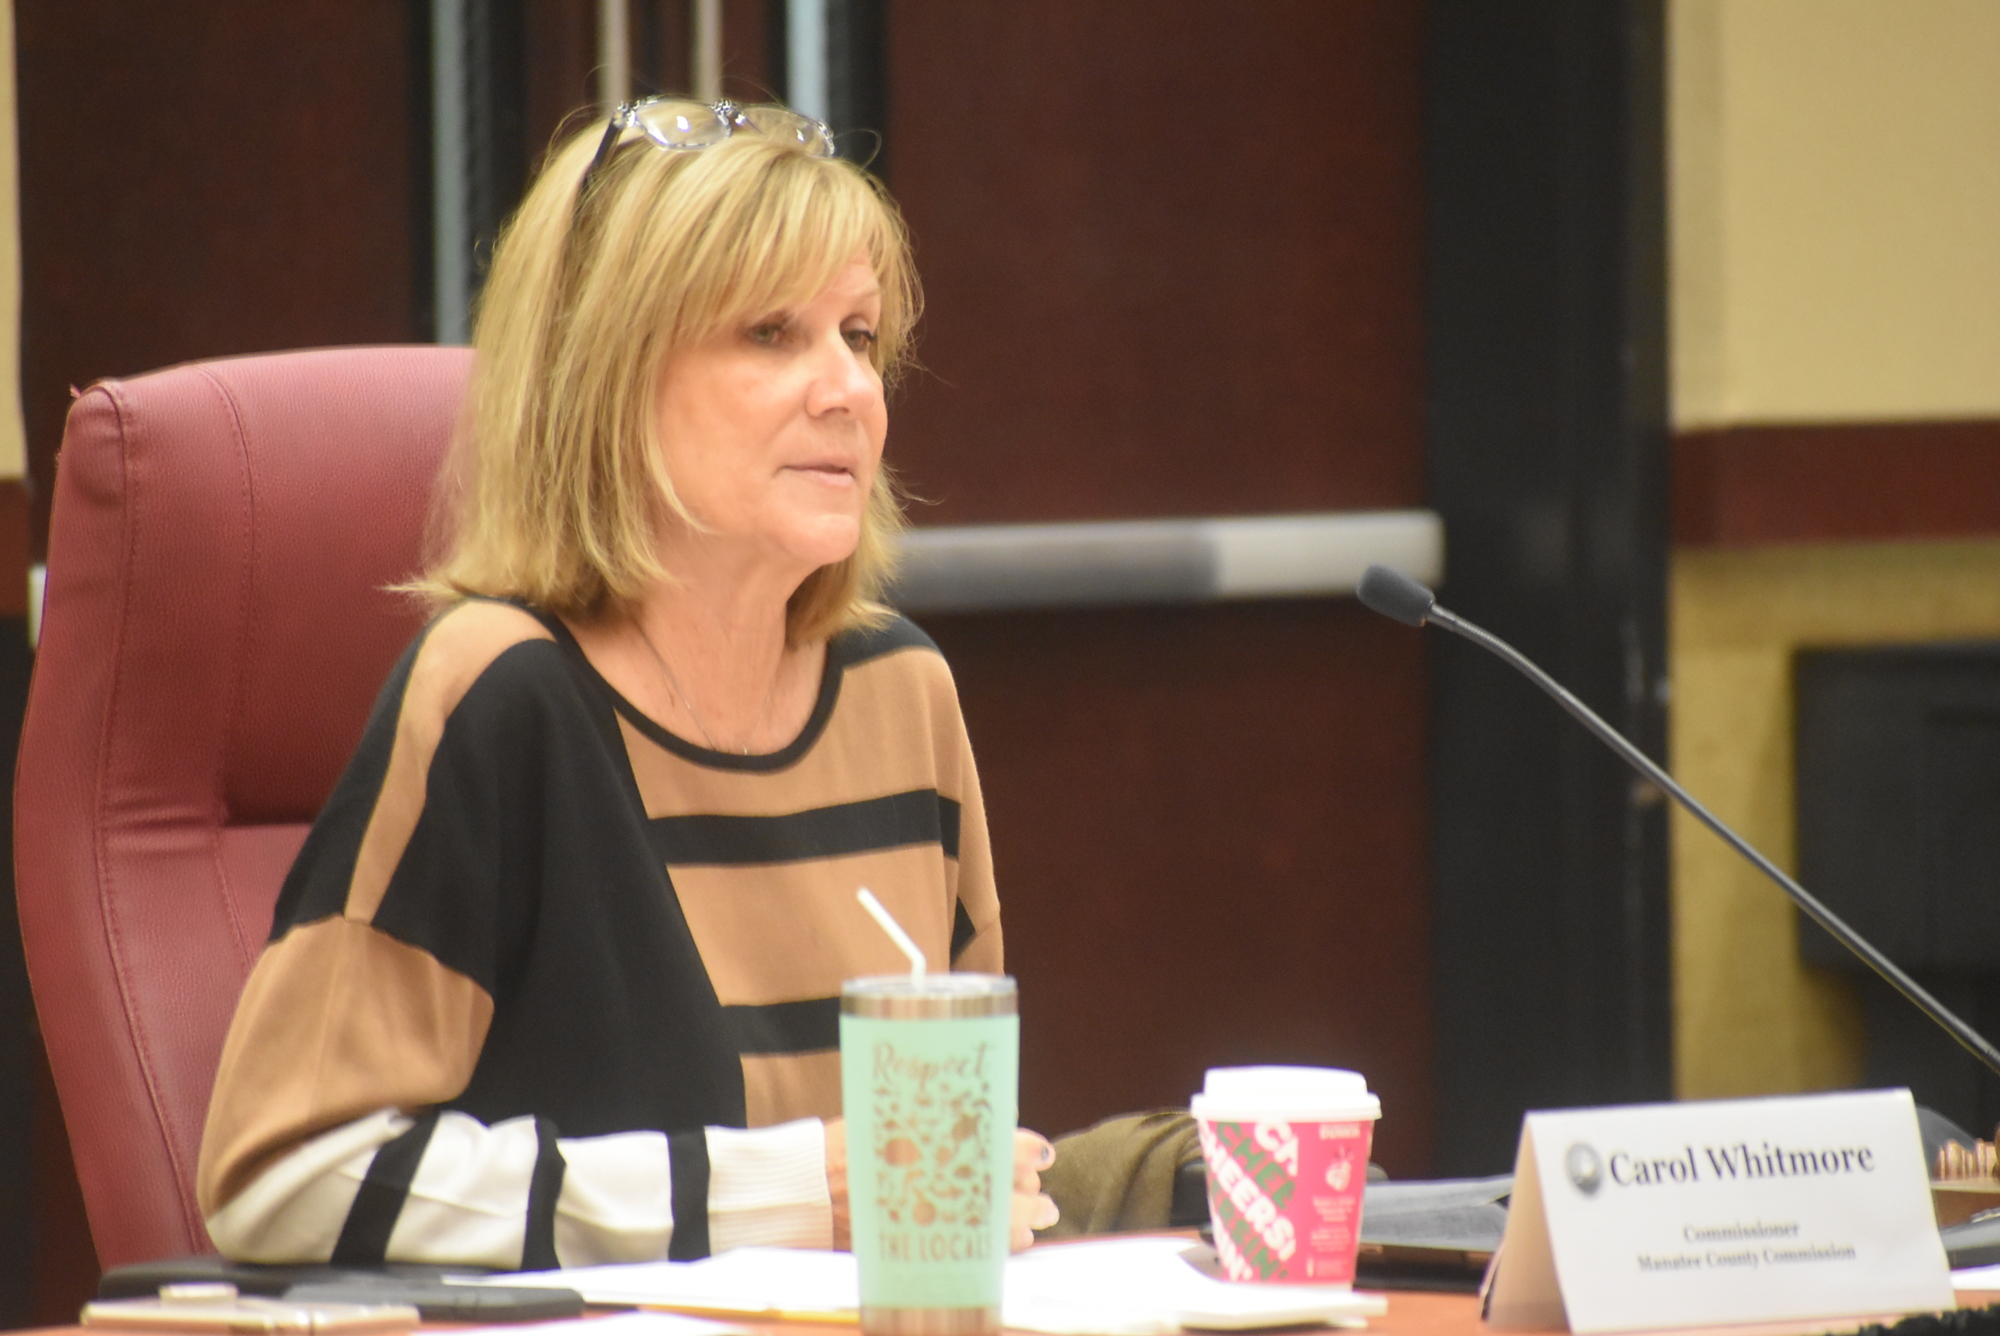 Manatee County commissioner Carol Whitmore, pictured at the Nov. 19 meeting where the status of Coryea's contract first came into question, hired a defense attorney after the Jan. 26 meeting.